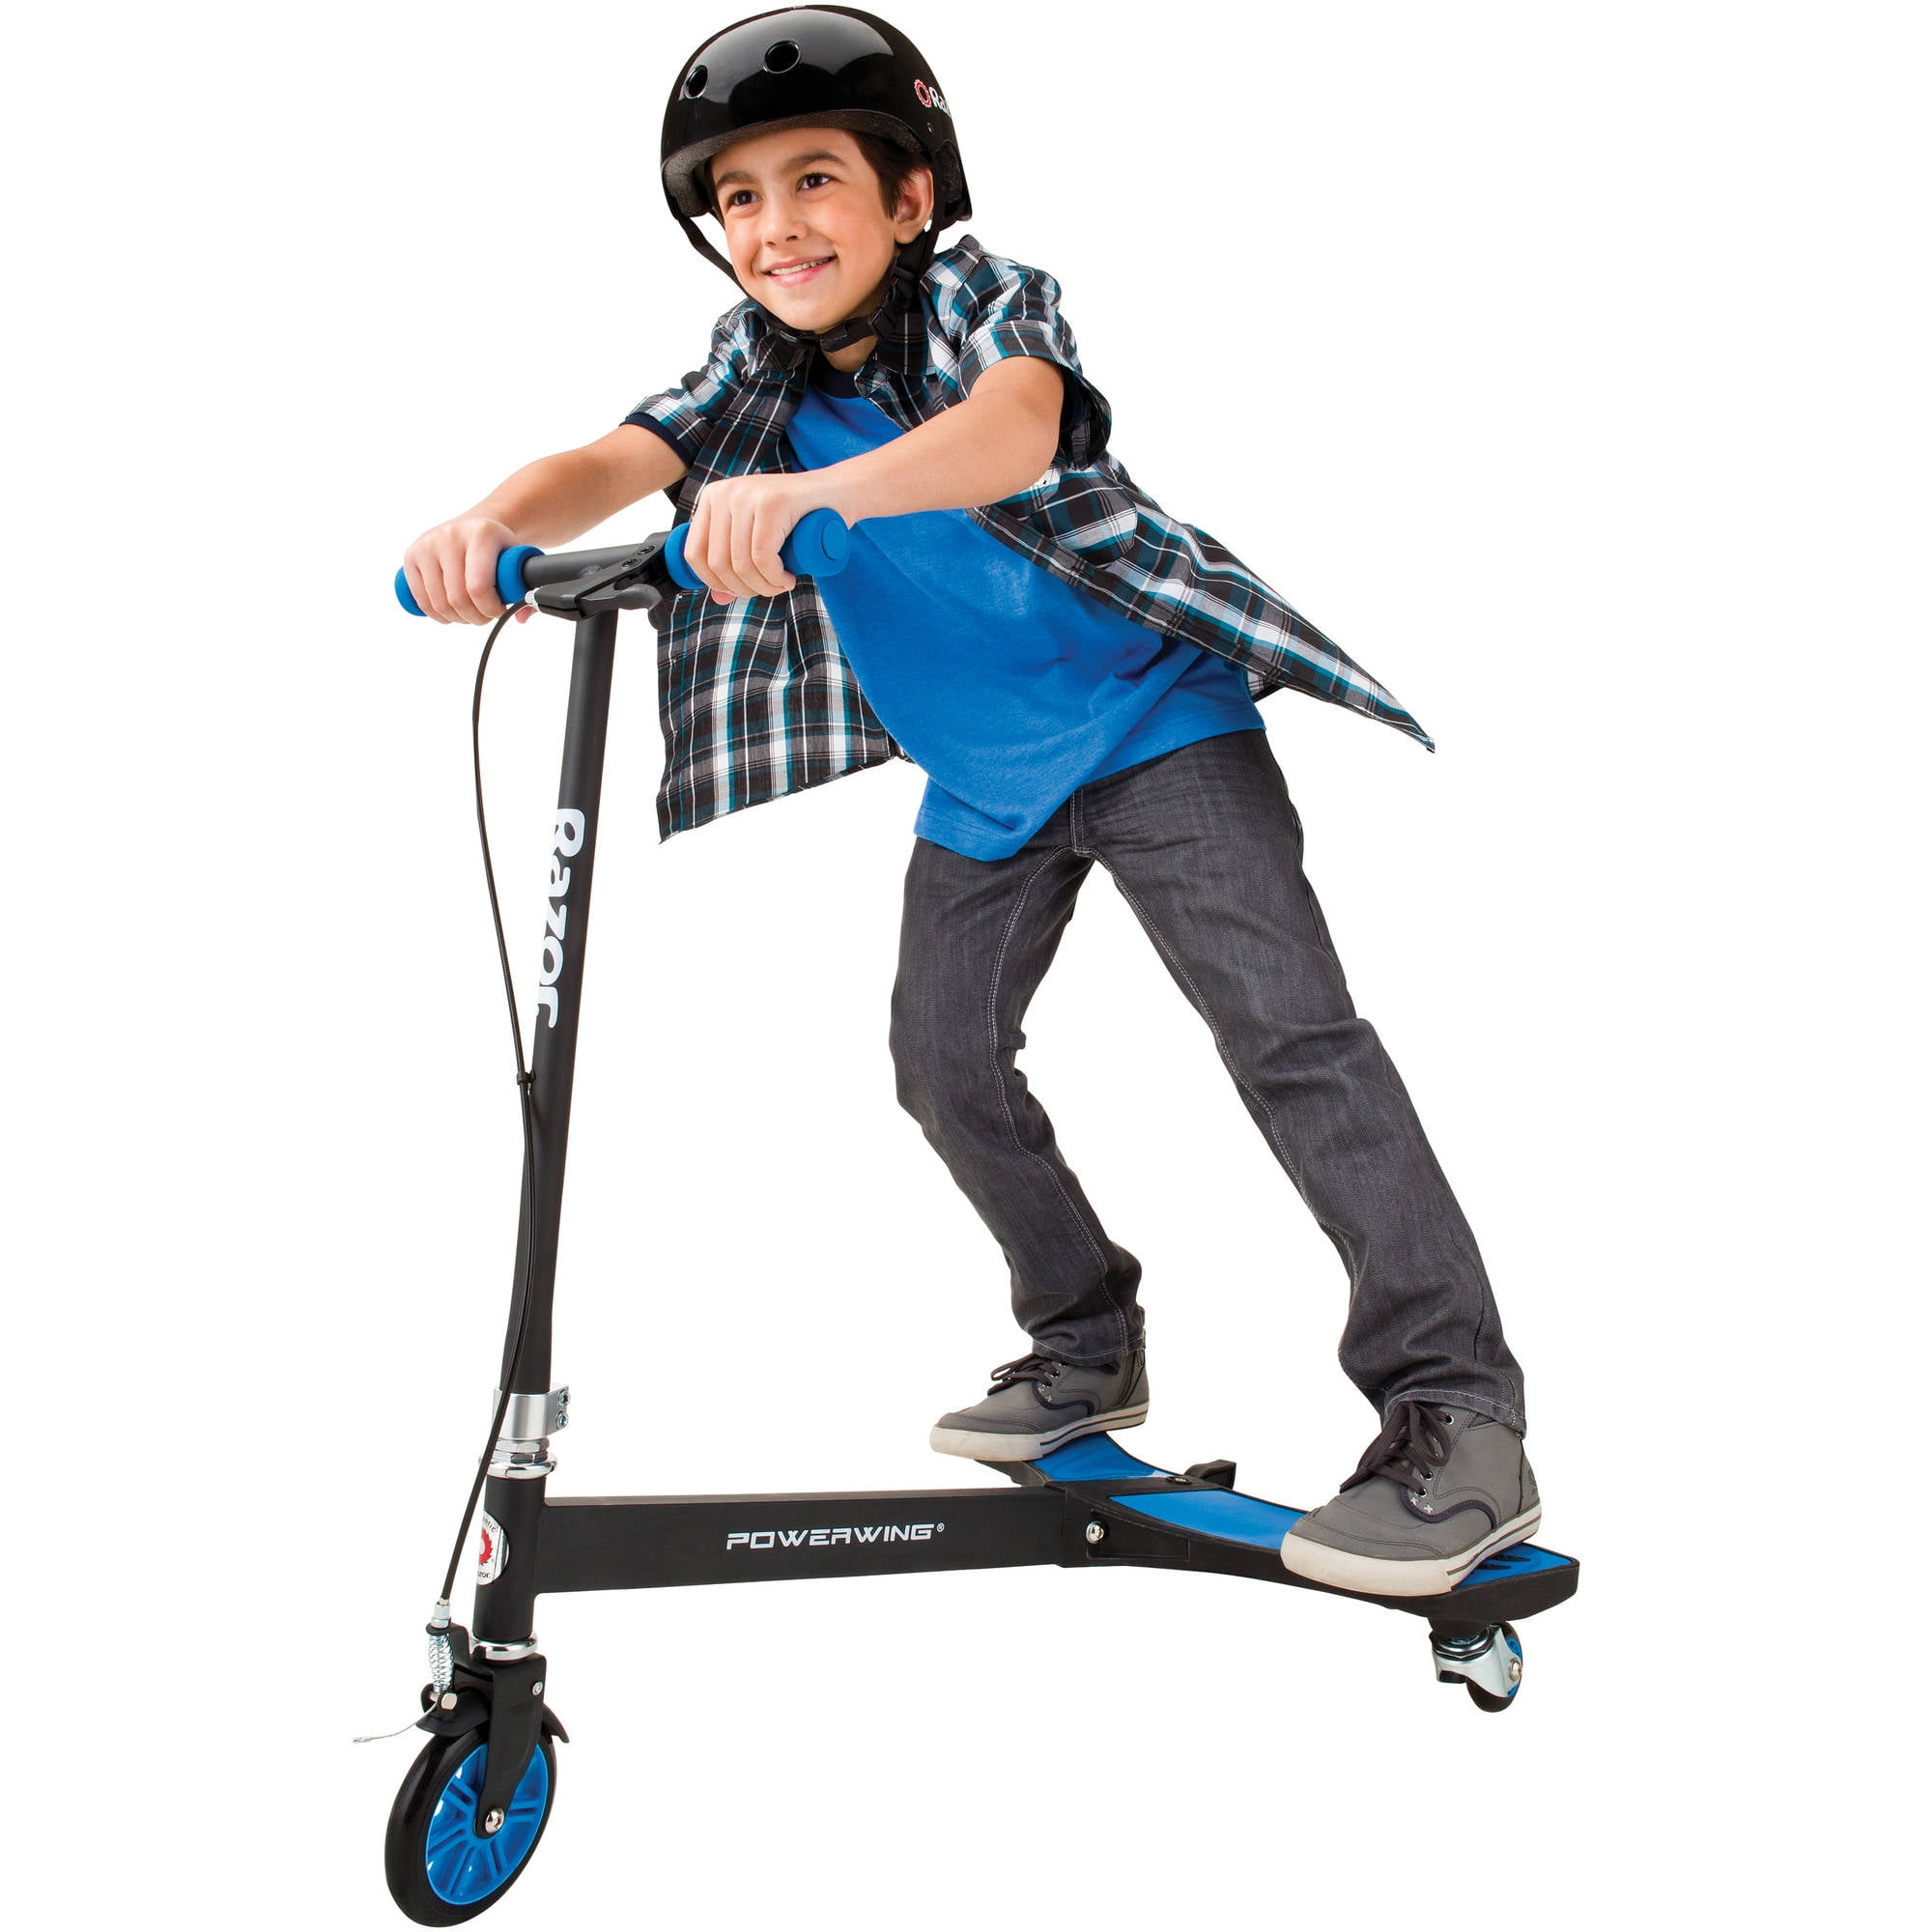 kid riding a razor scooter